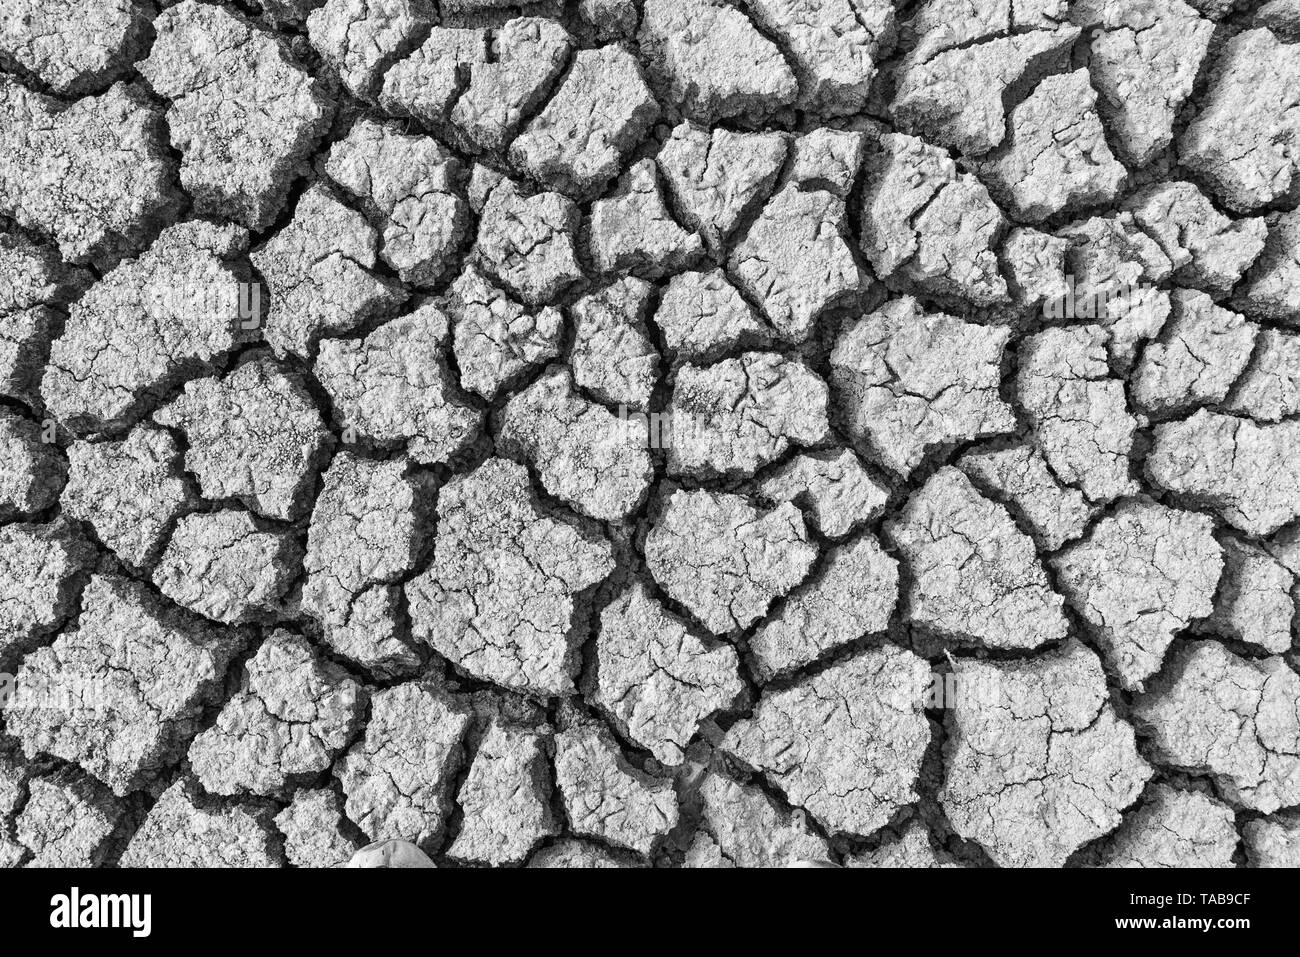 Dry cracked clay texture earth background Stock Photo